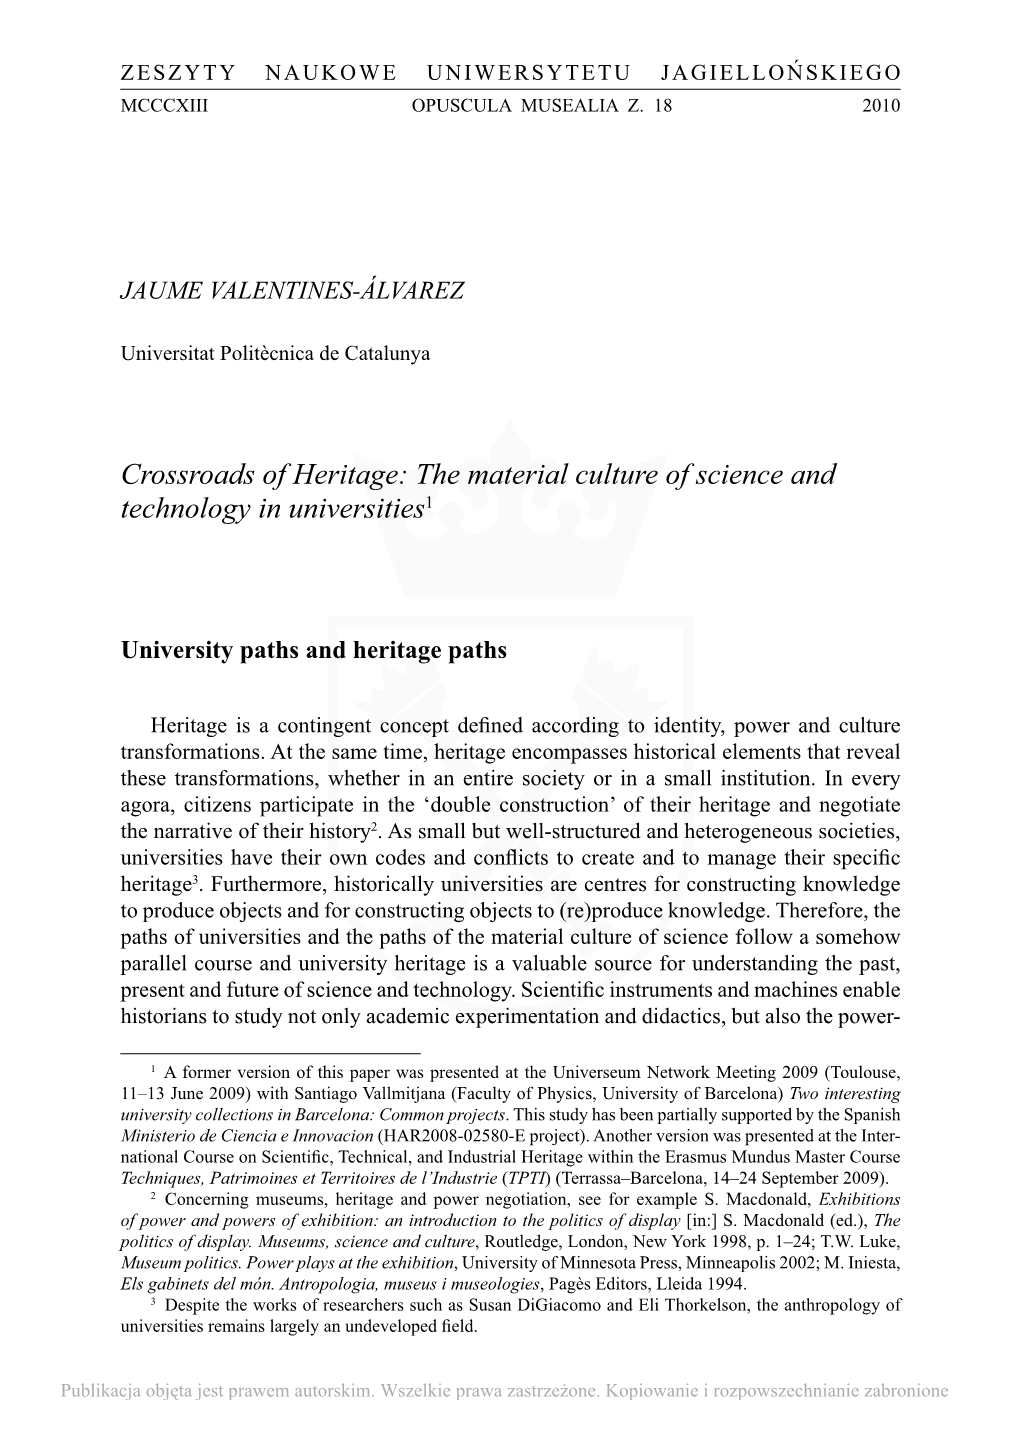 Crossroads of Heritage: the Material Culture of Science and Technology in Universities1